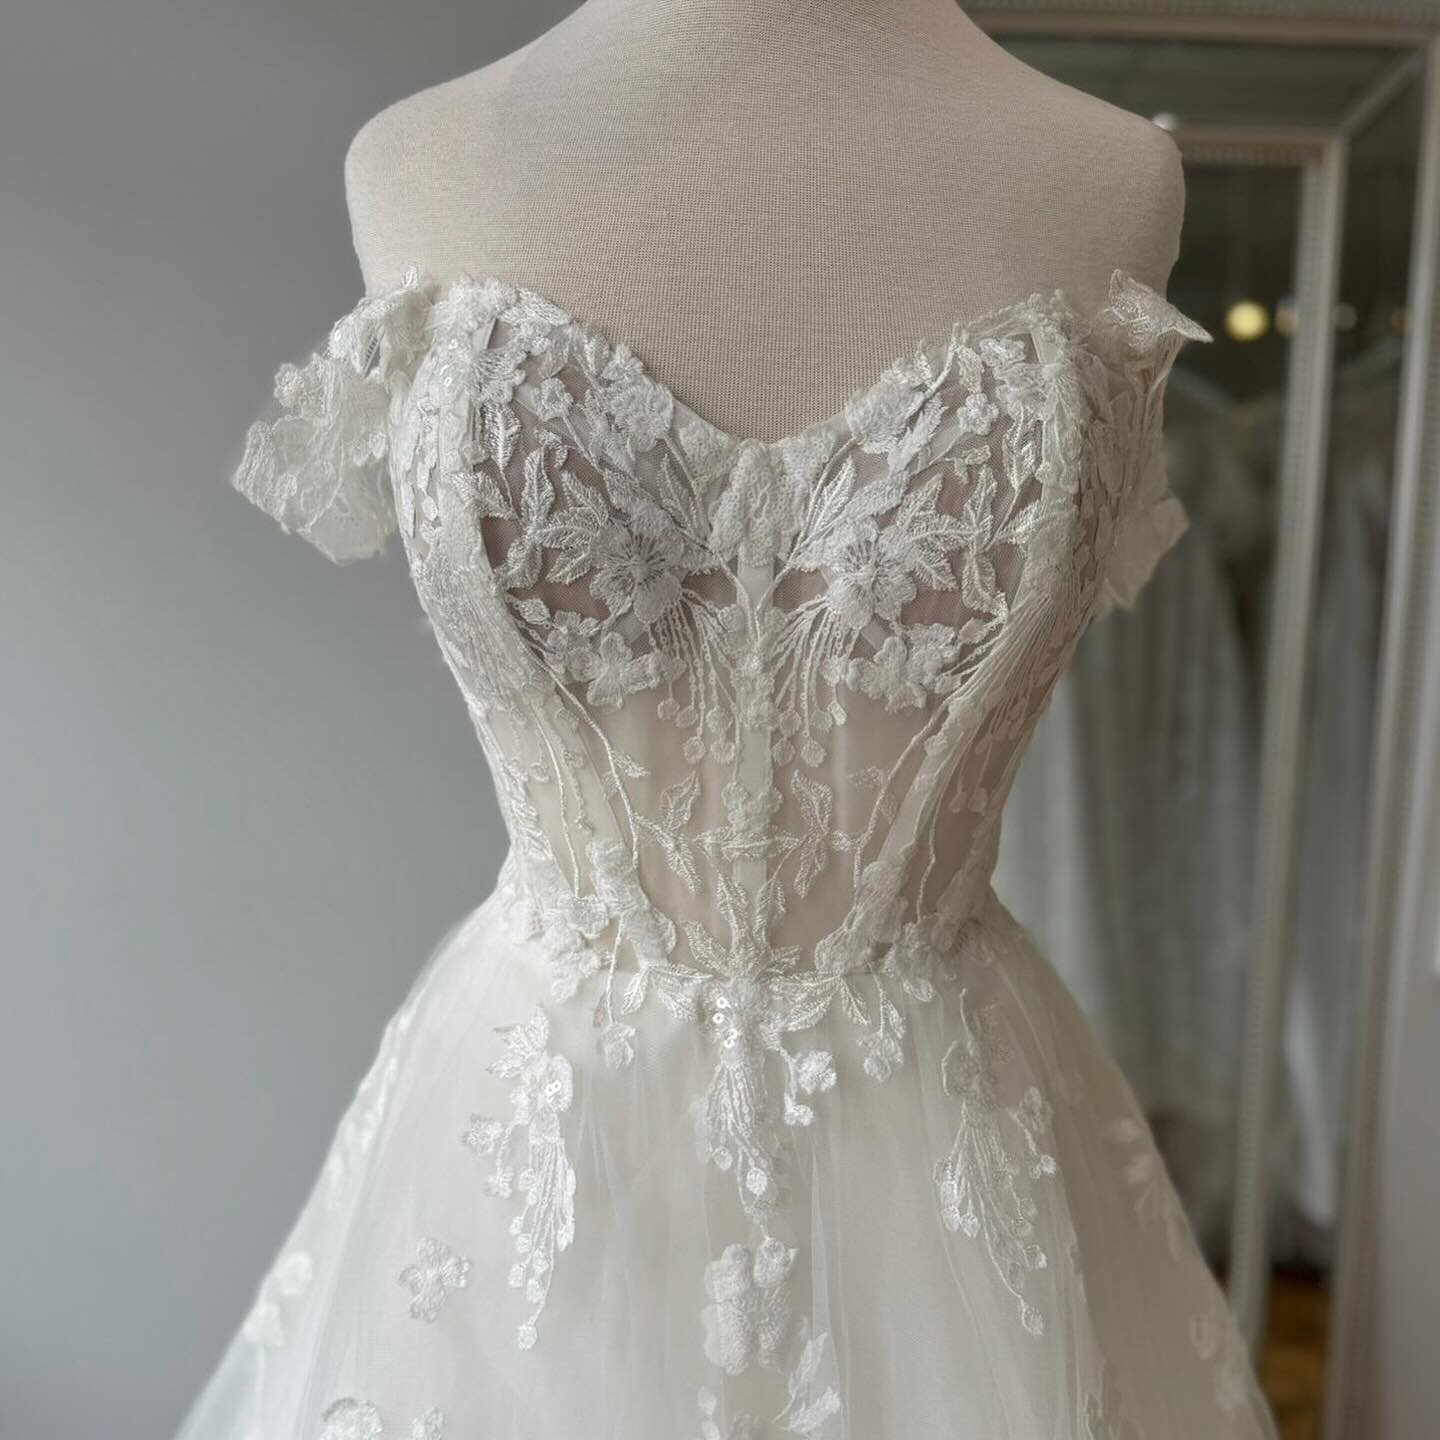 New arrival alert!!

I&rsquo;ve loved this particular style for a while and I&rsquo;m so excited that we have *one* of her! She&rsquo;s got a sweetheart neckline, low V back, off shoulder and lace appliqu&eacute;s detailed with sequins!!

Designer - 